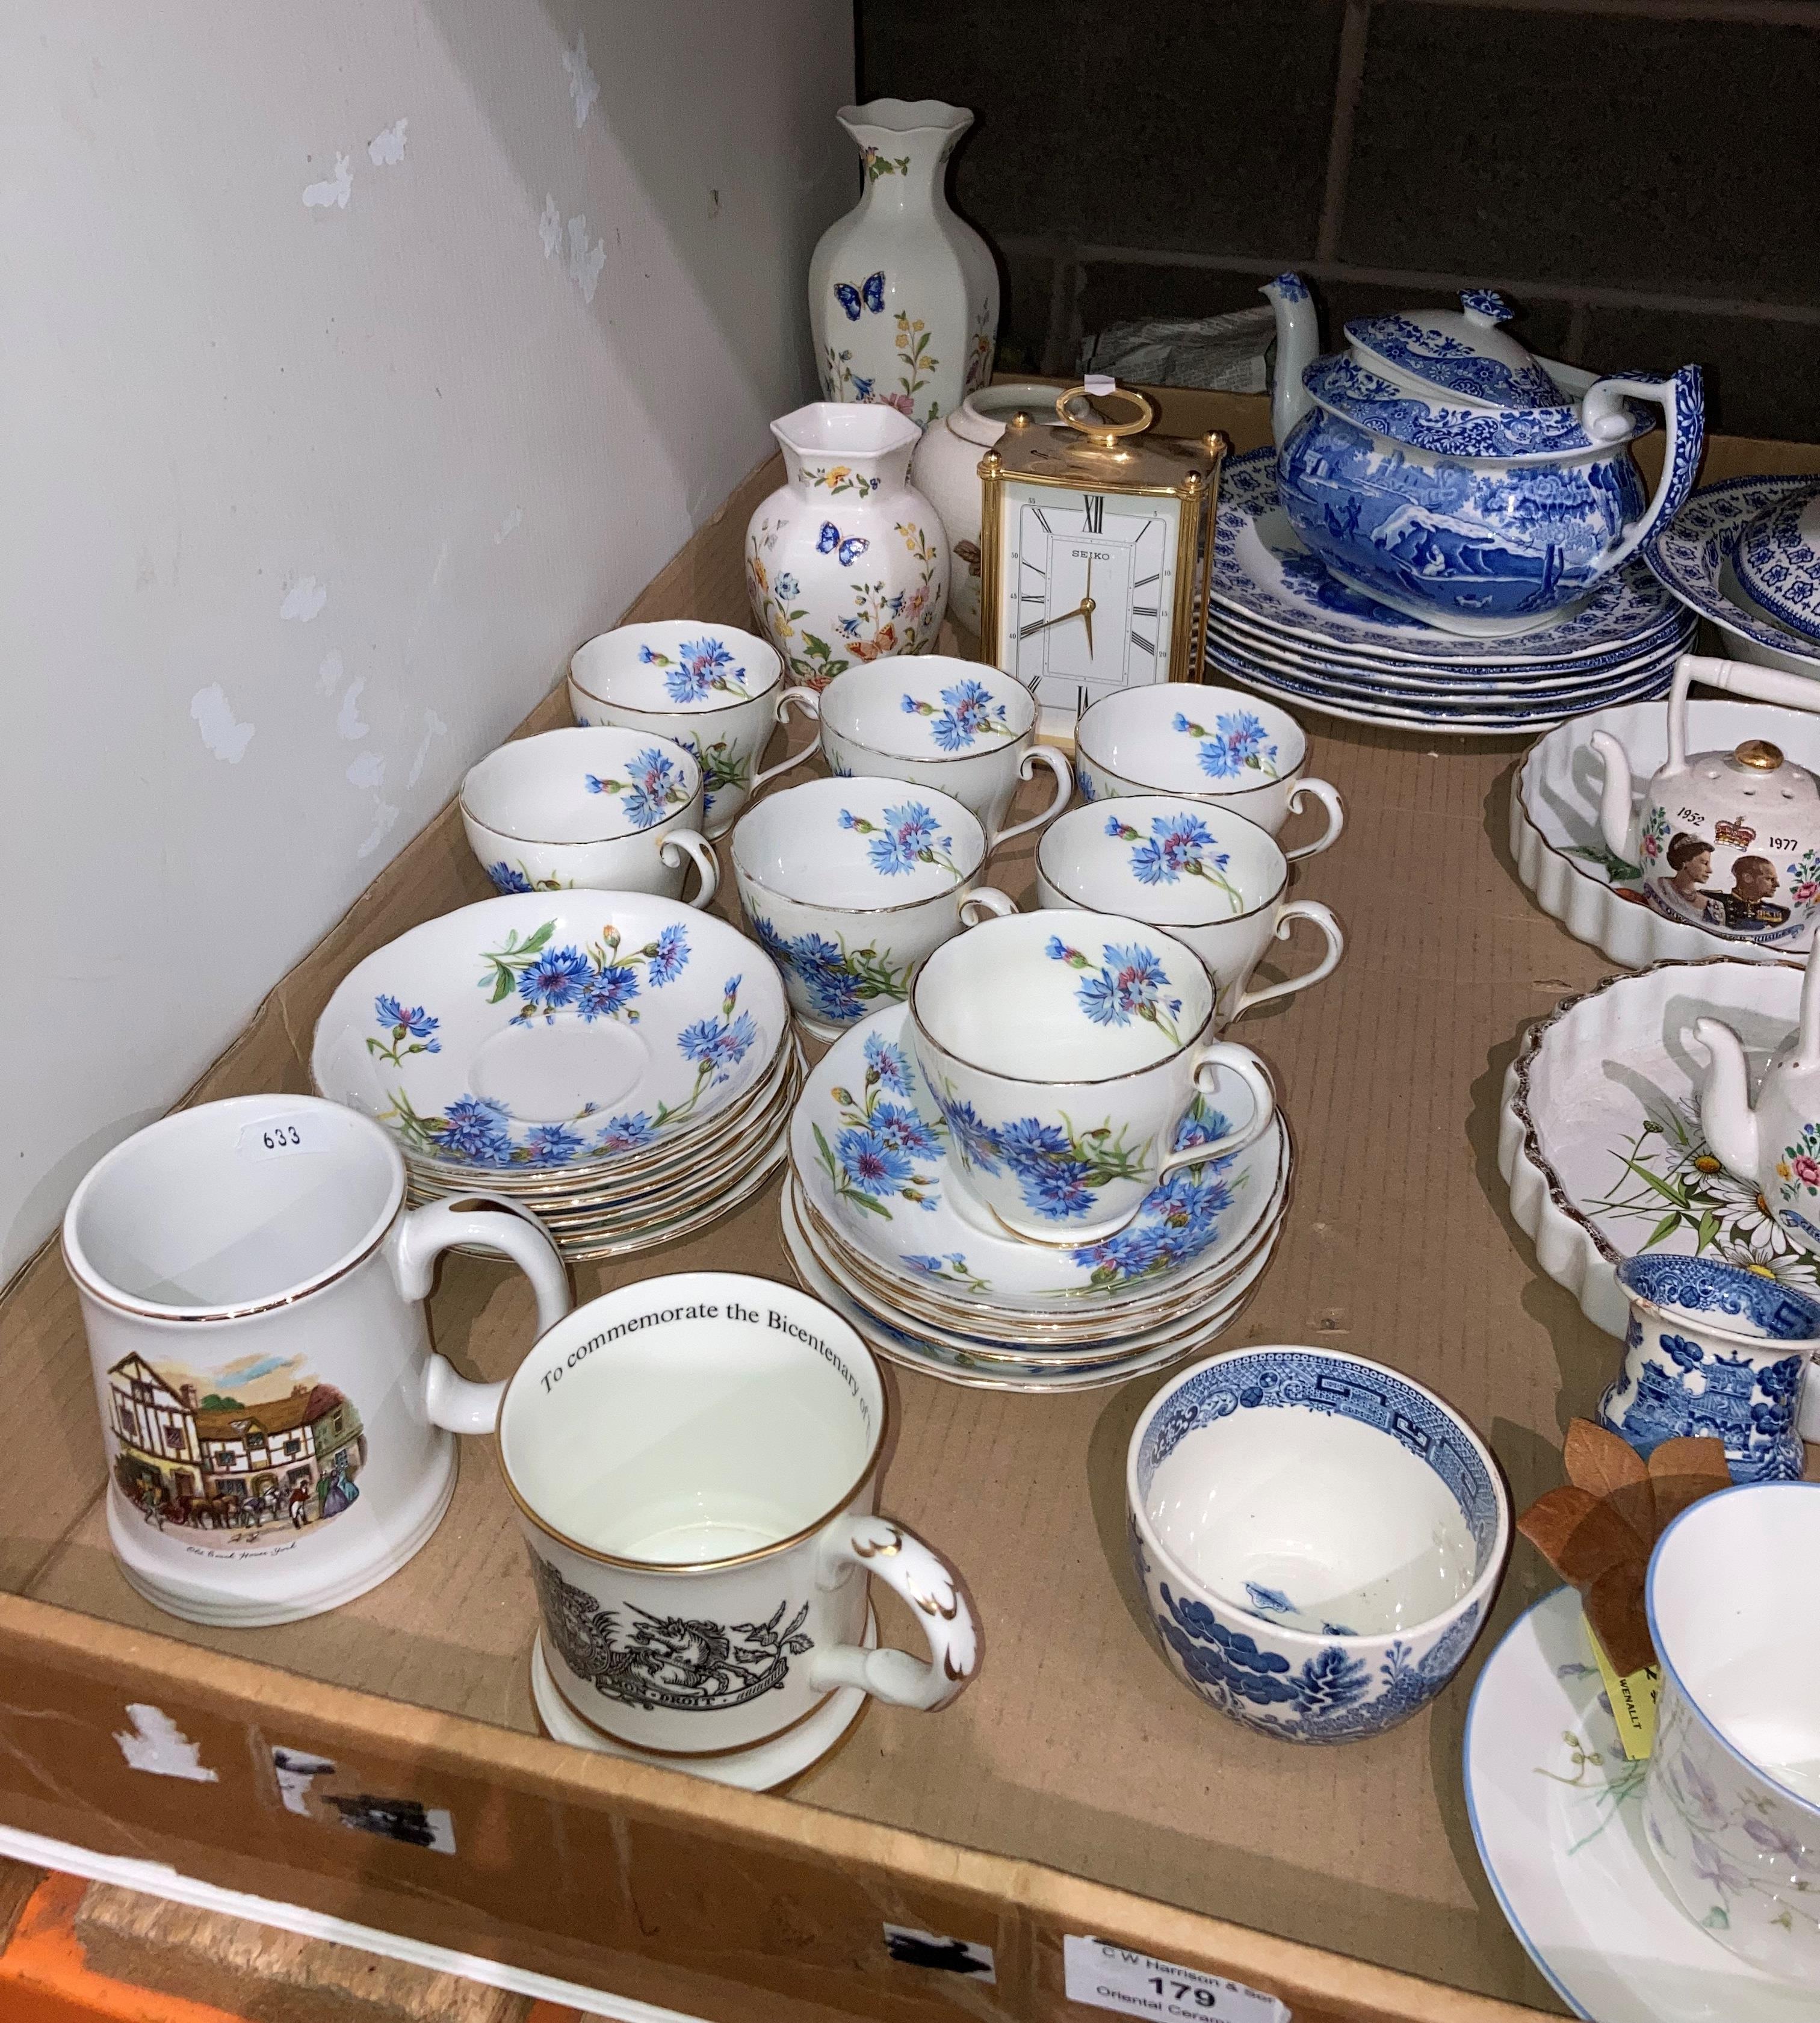 Contents to tray - 18-piece part tea service by Adderley, assorted ceramics by Aynsley, Copeland, - Image 2 of 3